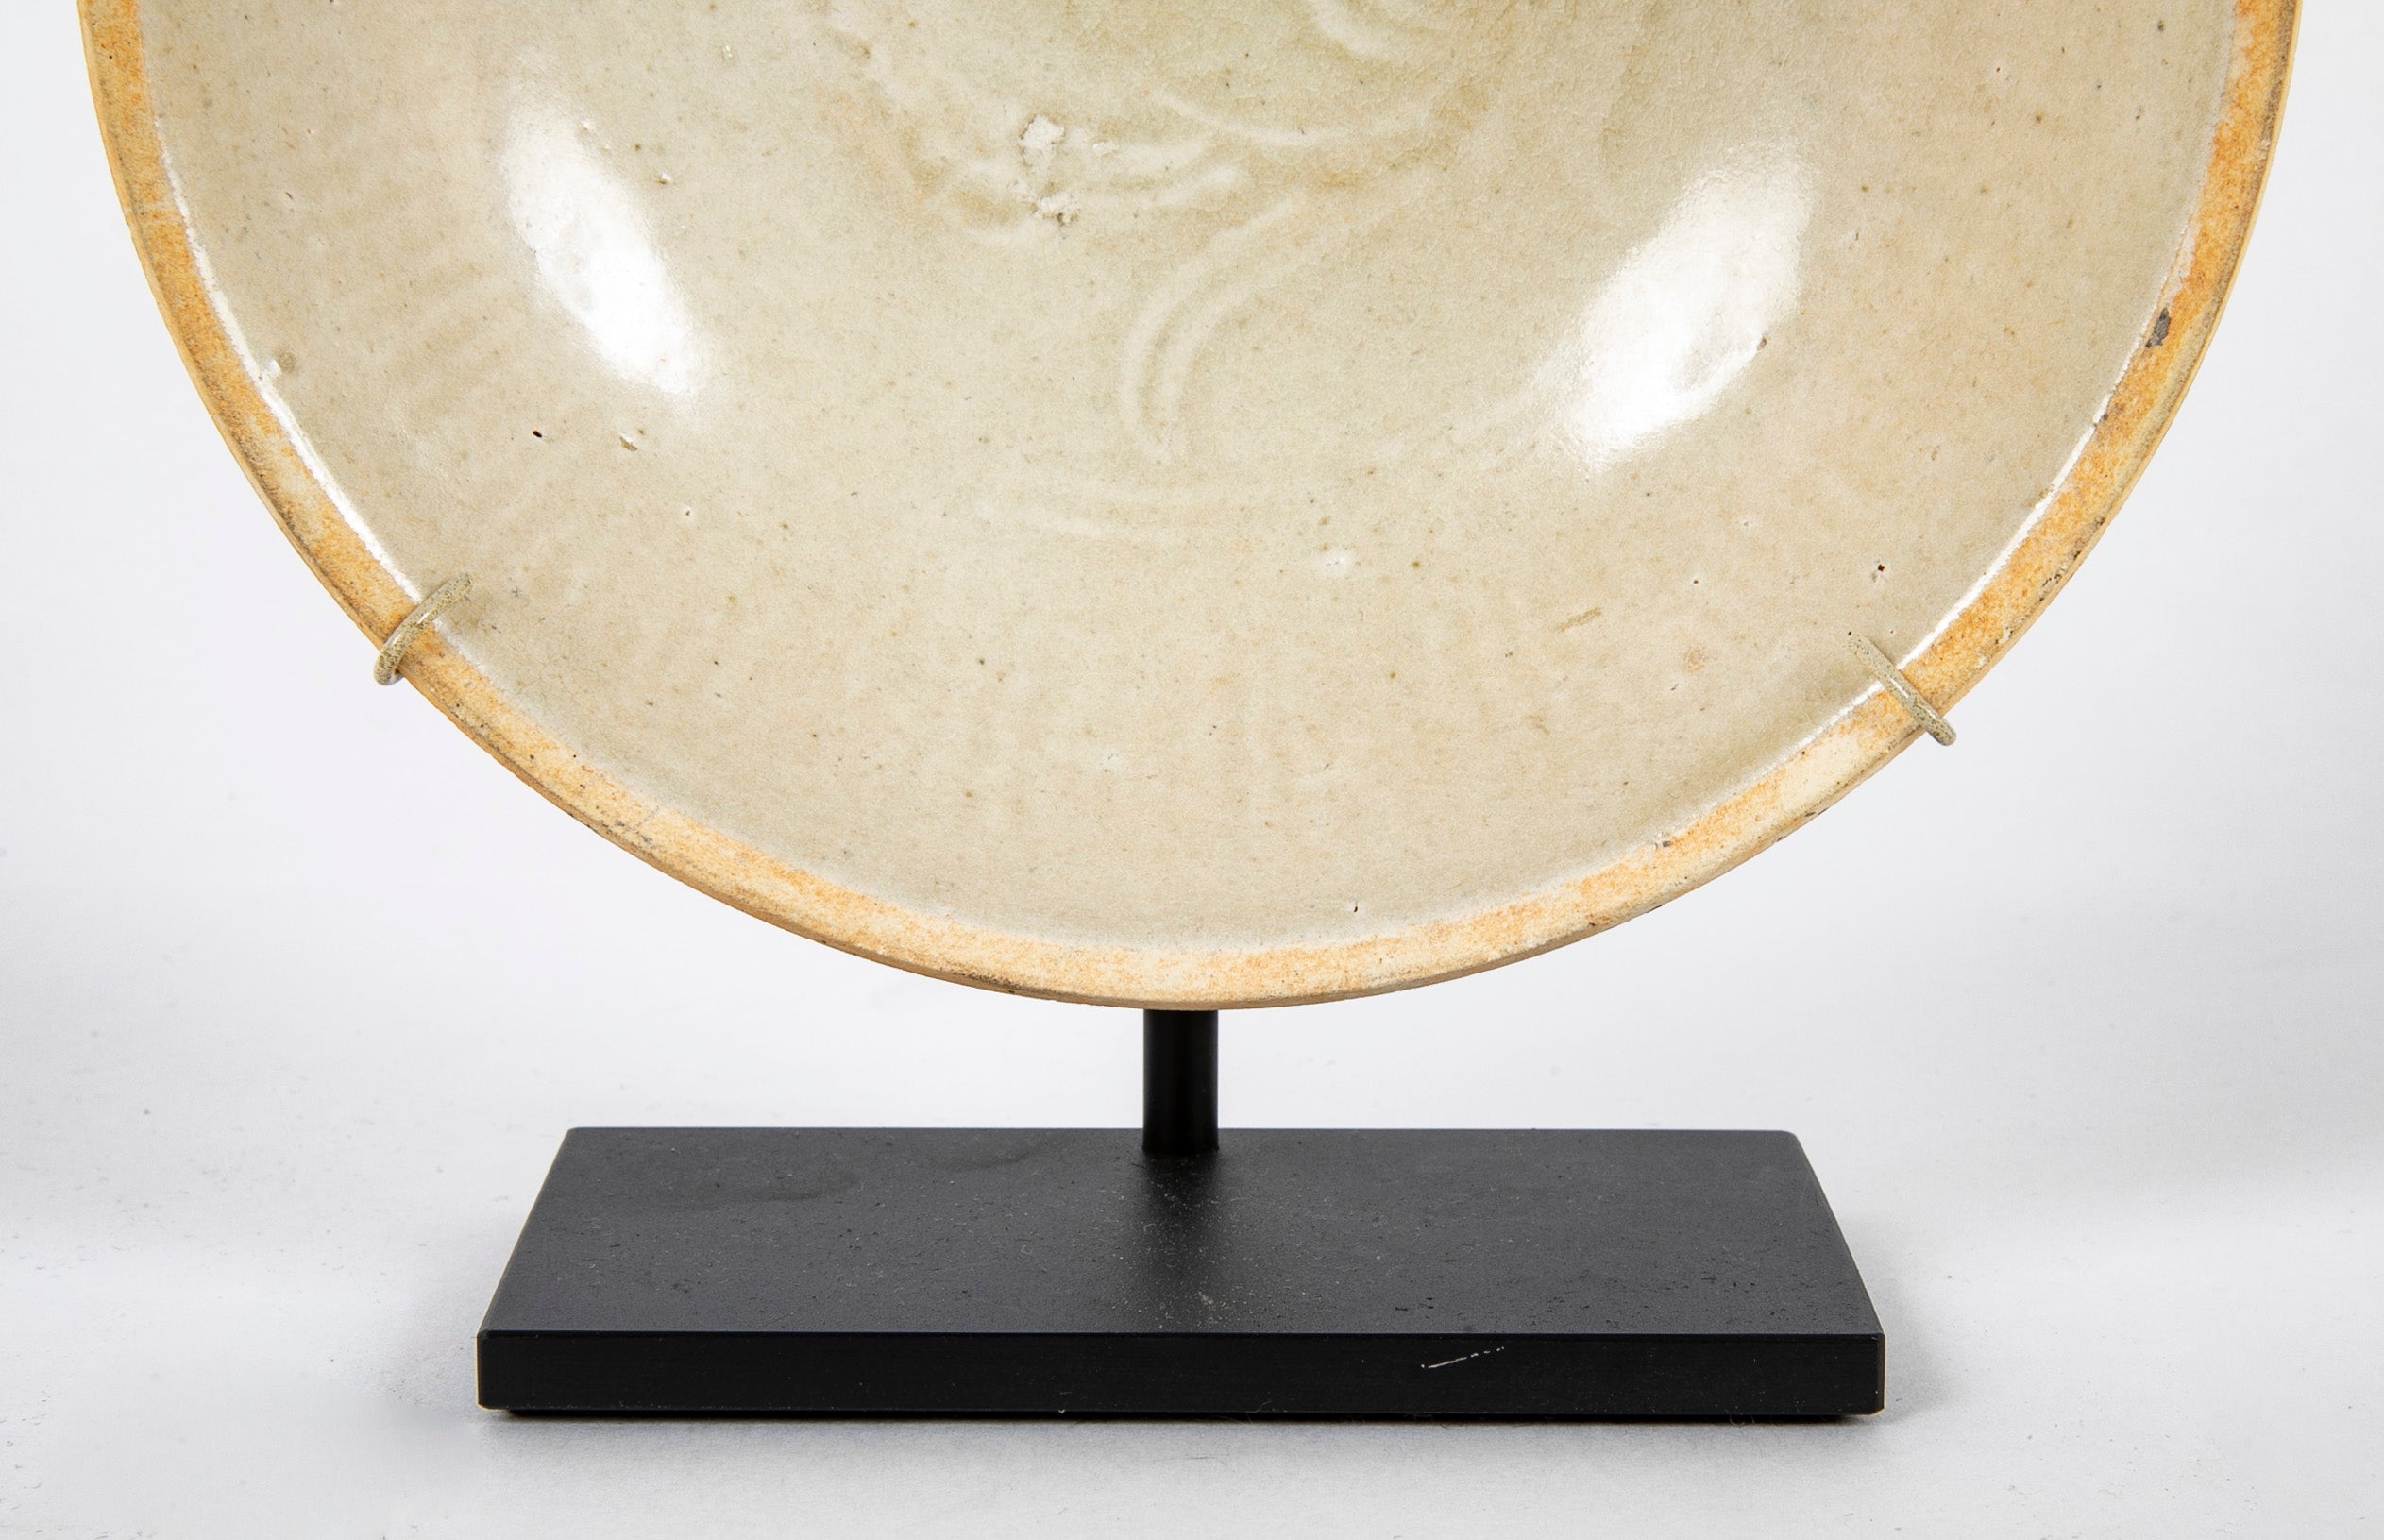 Song Dynasty Bowl on Modern Stand